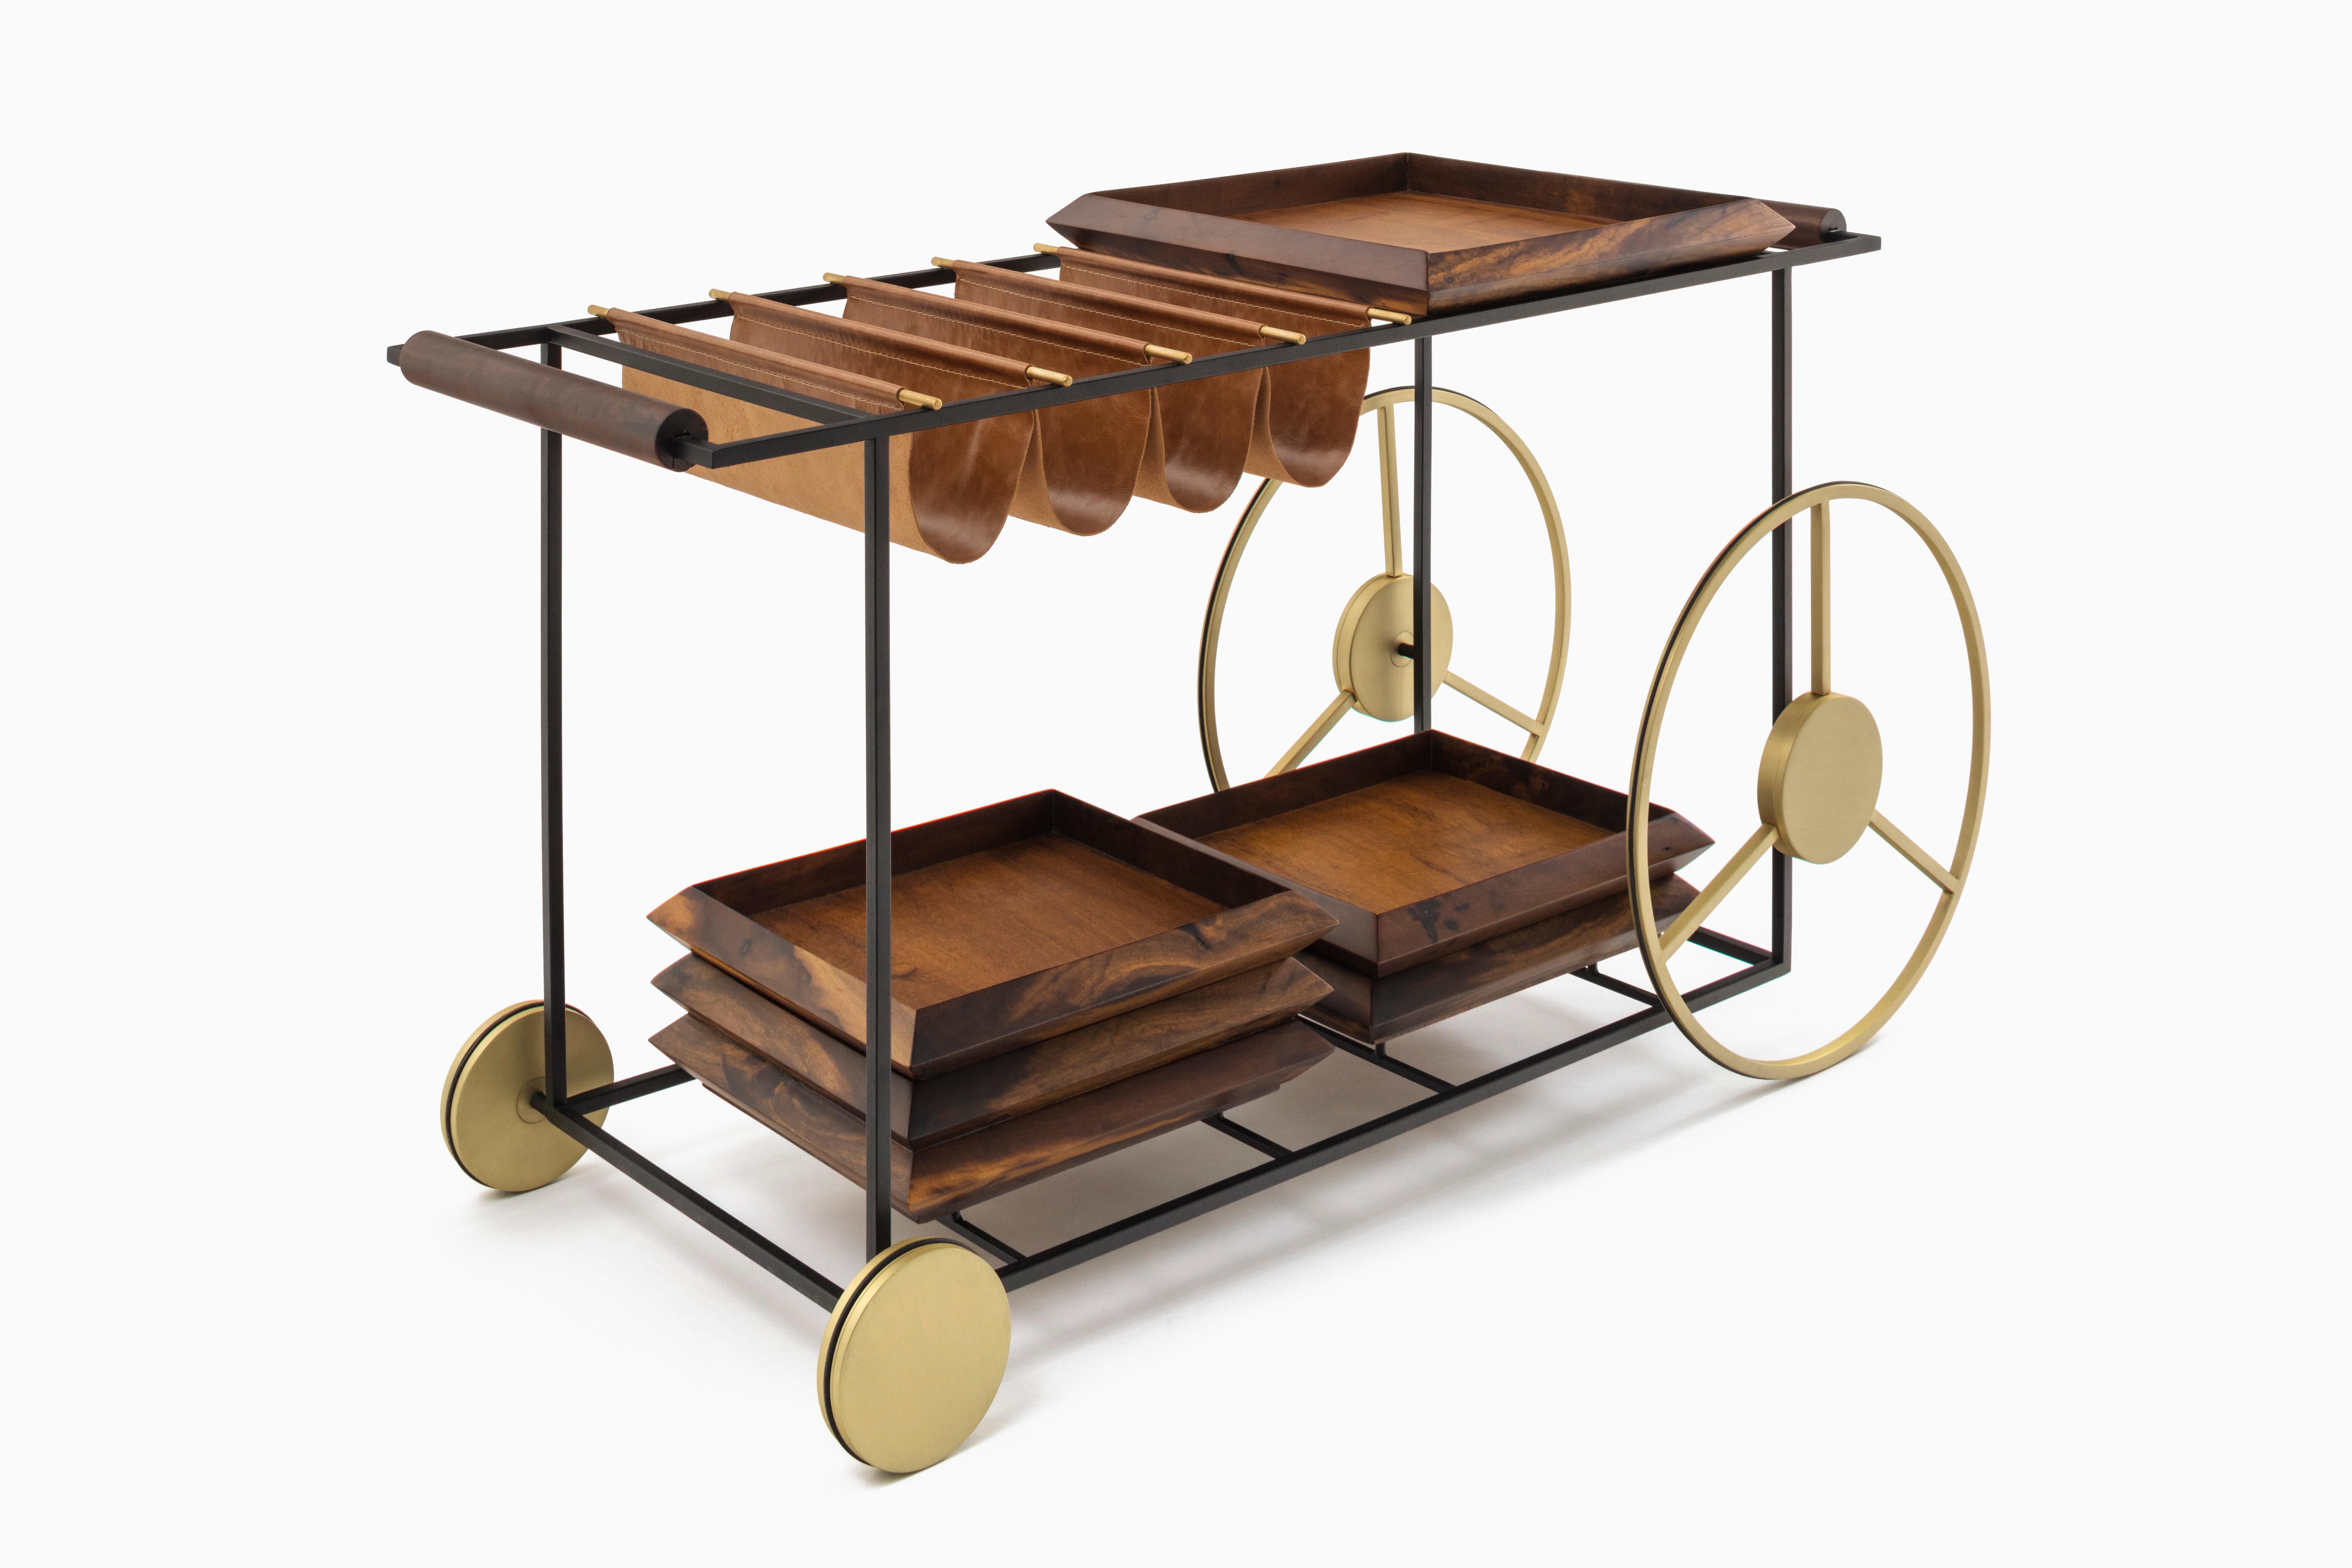 The Locomotive tea cart was developed to rescue the affective memory in families, with simple design and sophisticated materials the tea cart was exposed in the ‘made’, important fair that takes place in São Paulo every year and launches new